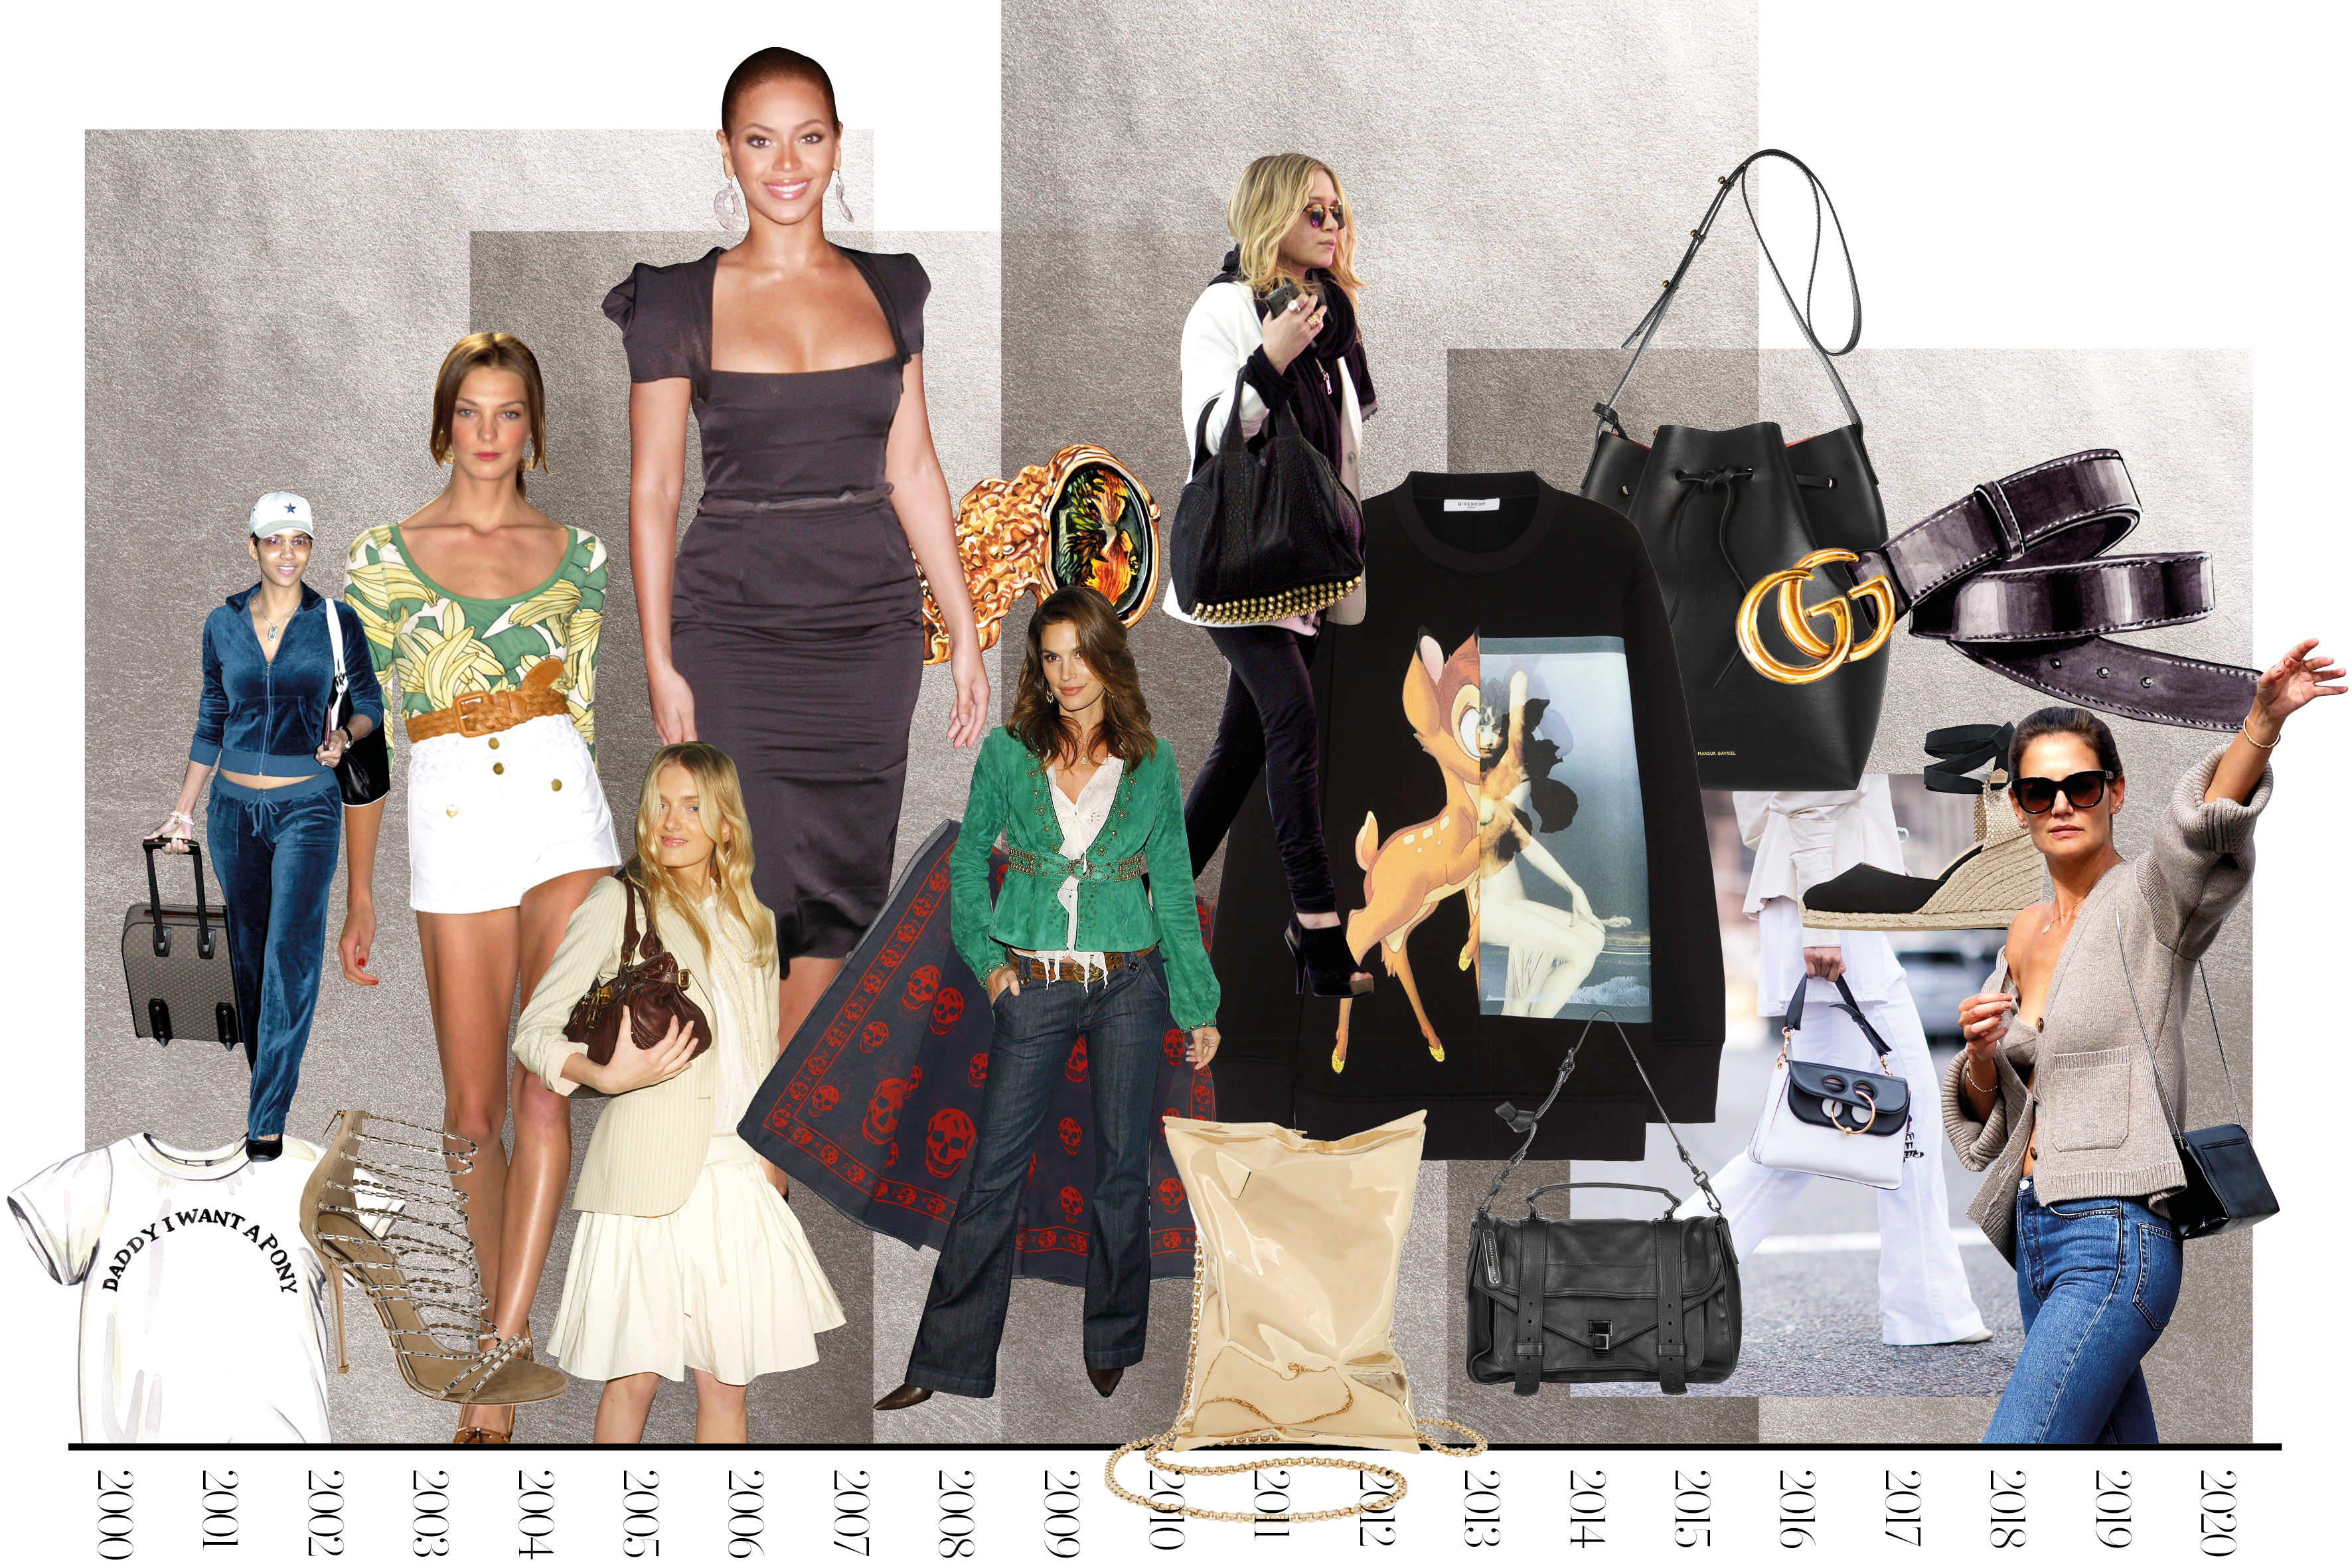 A timeline of NET-A-PORTER’s bestsellers and most-wanted pieces since 2000